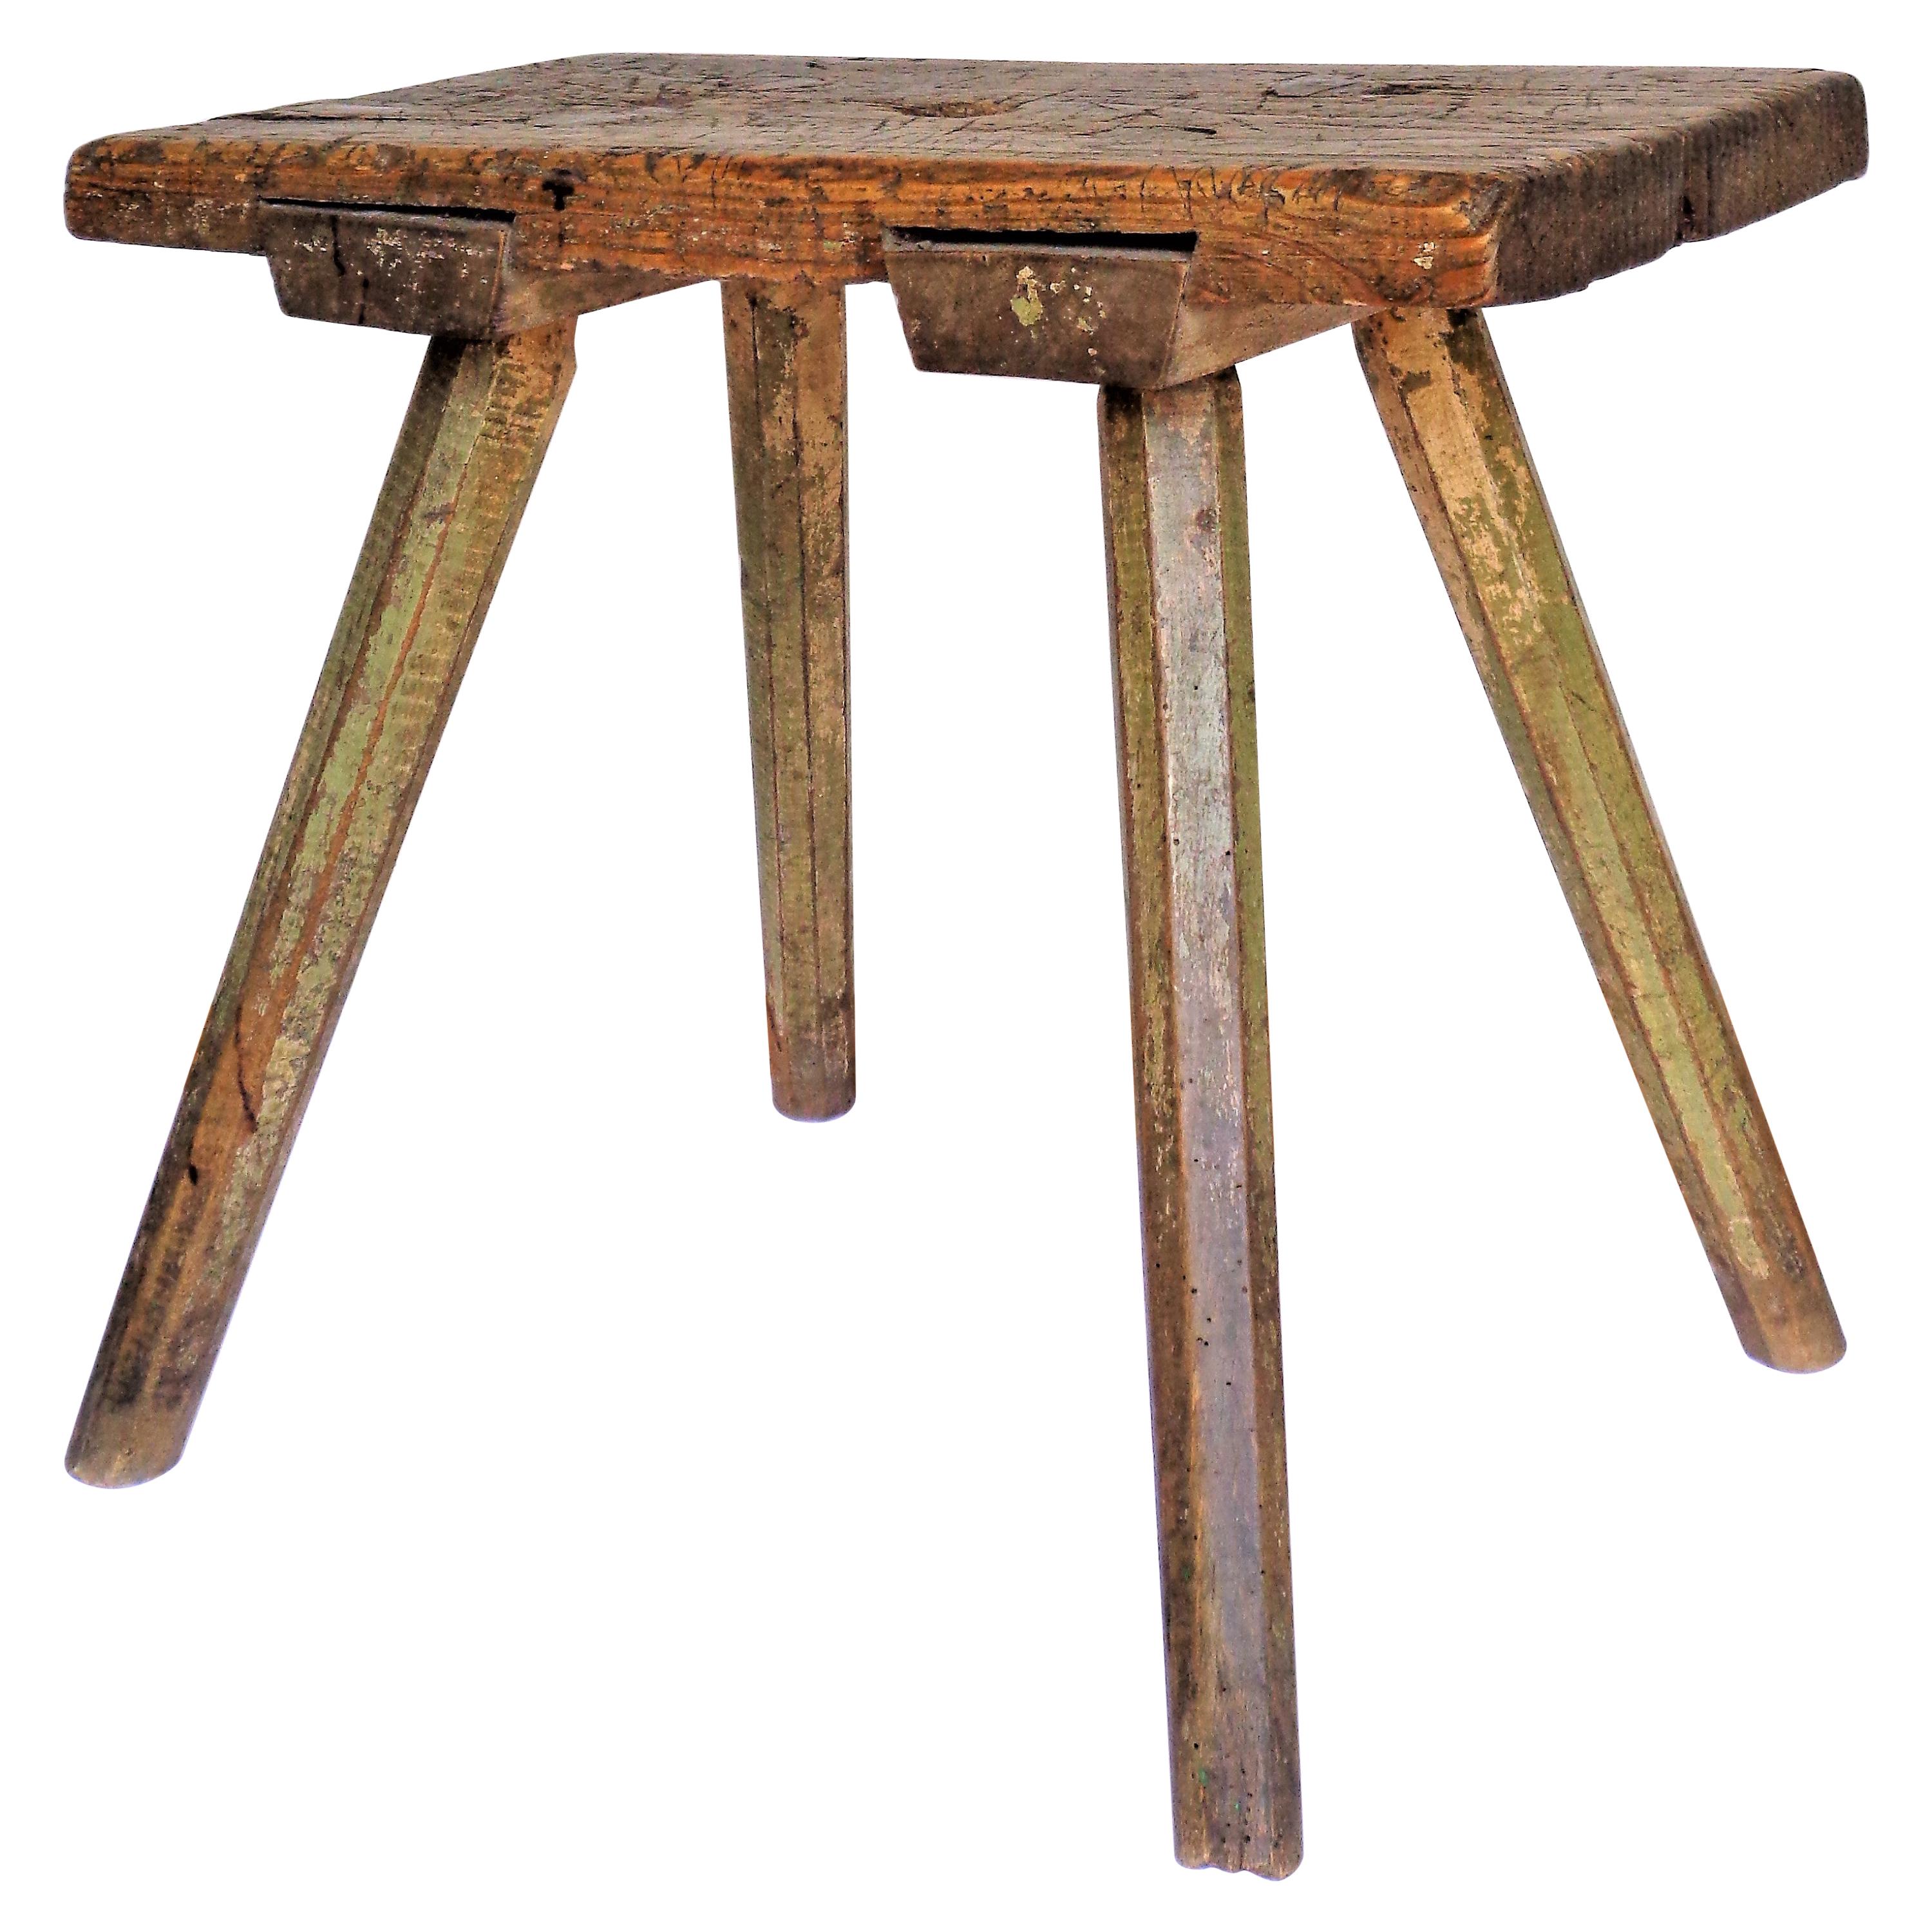 19th Century American Painted Primitive Stool